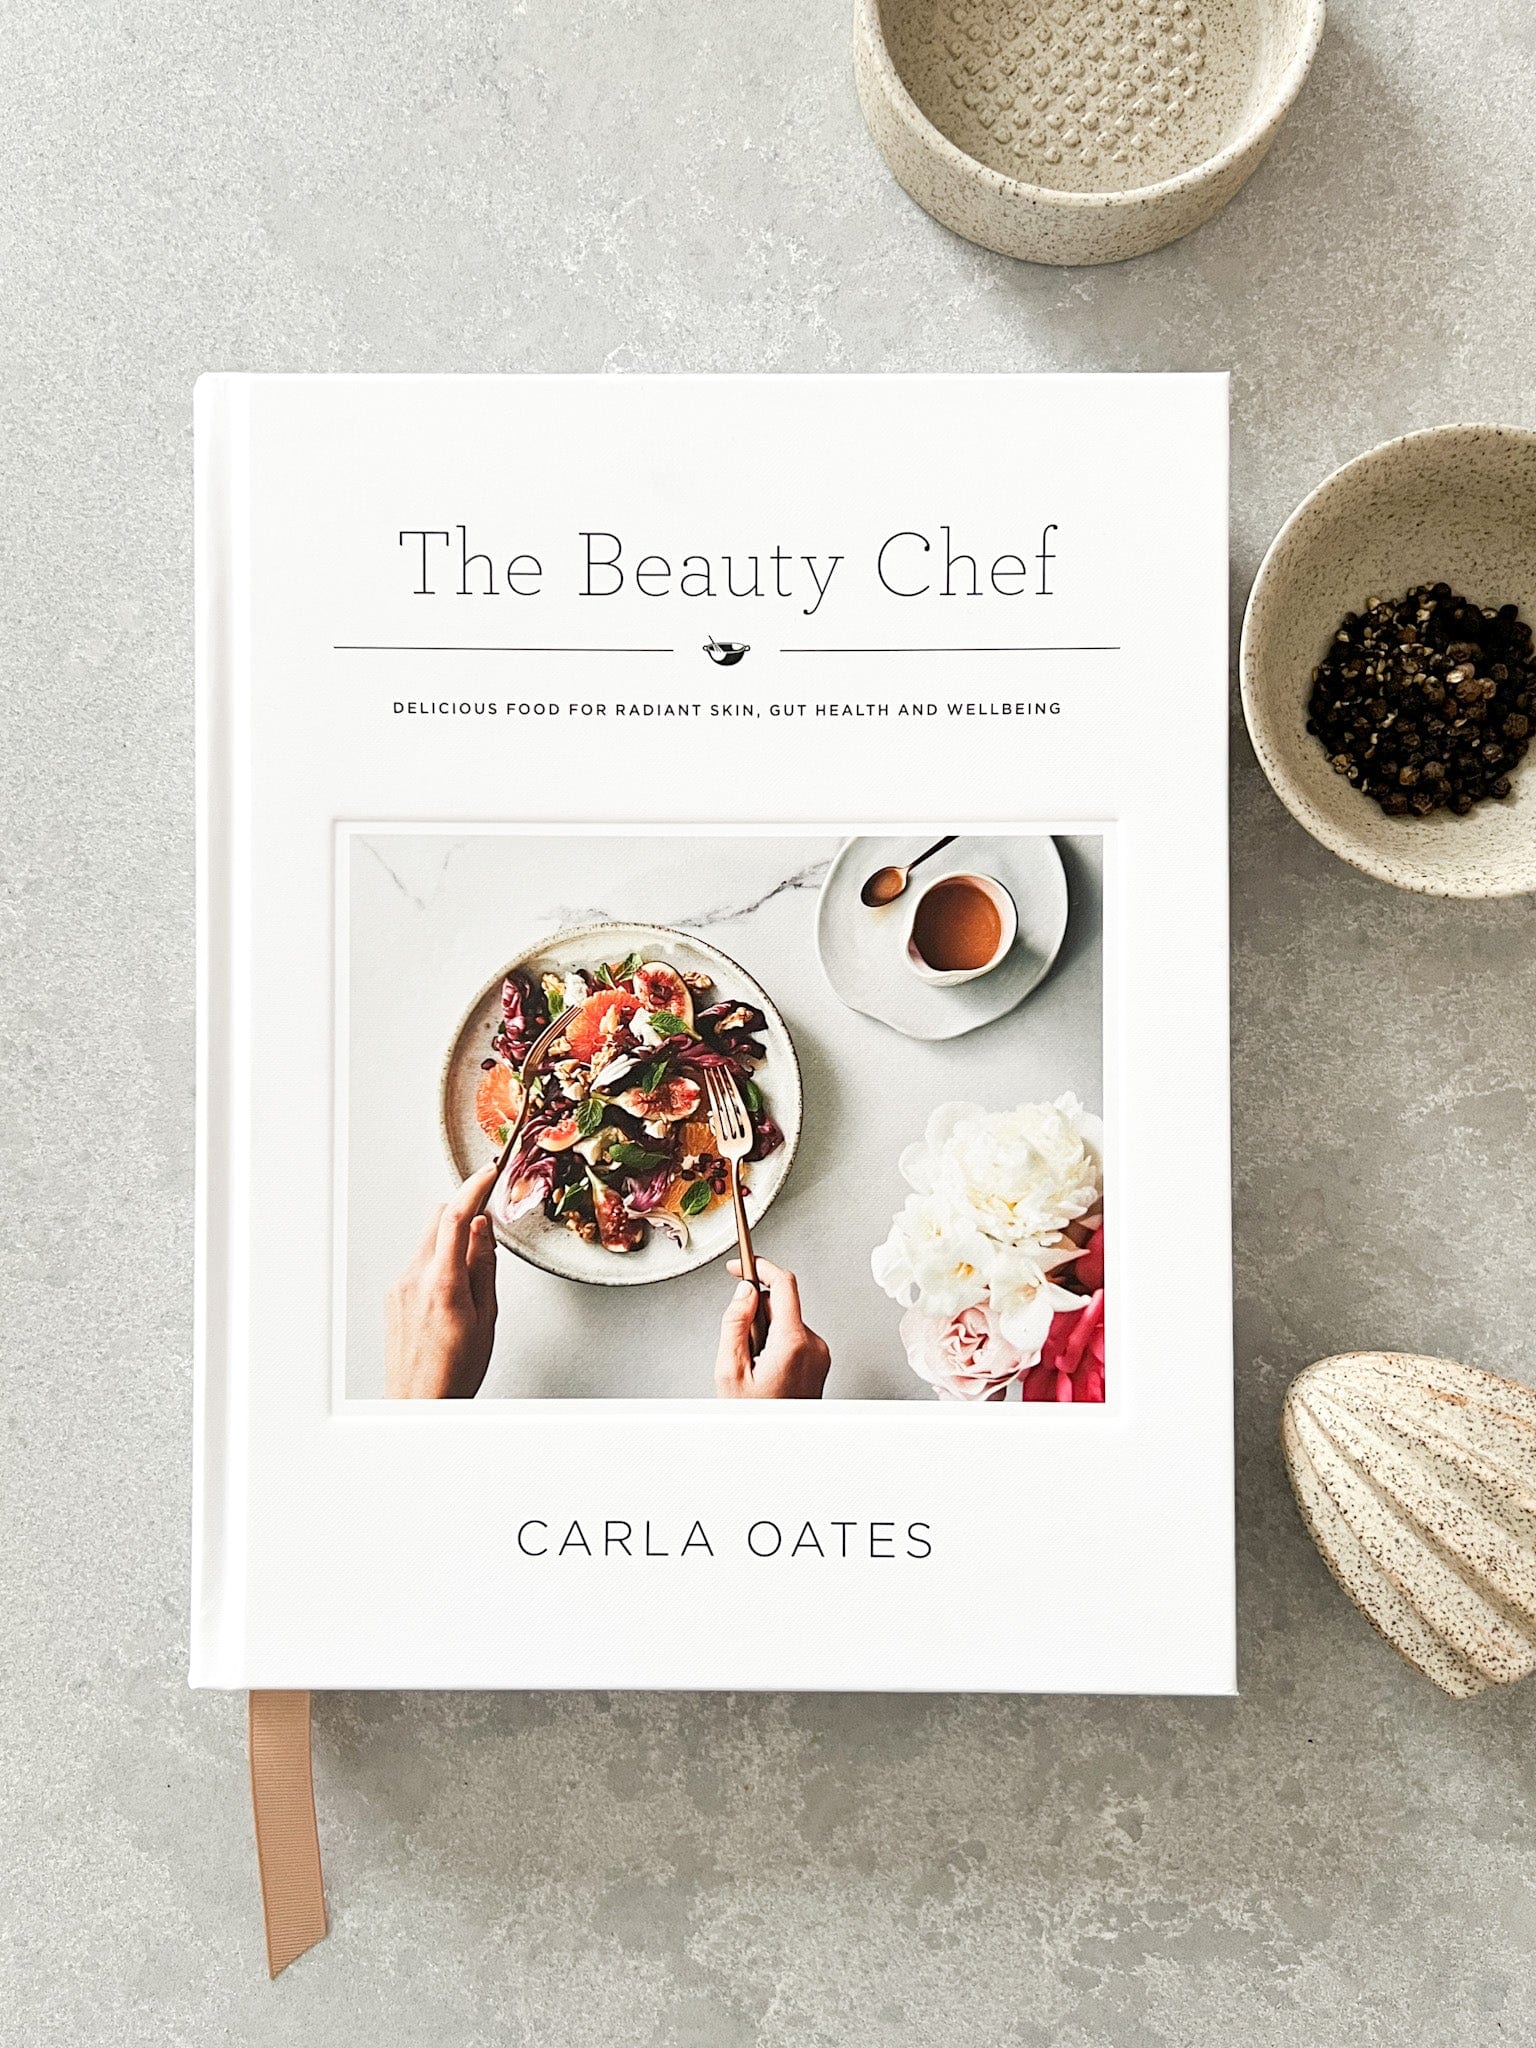 The Beauty Chef by Carla Oates (9629564995)